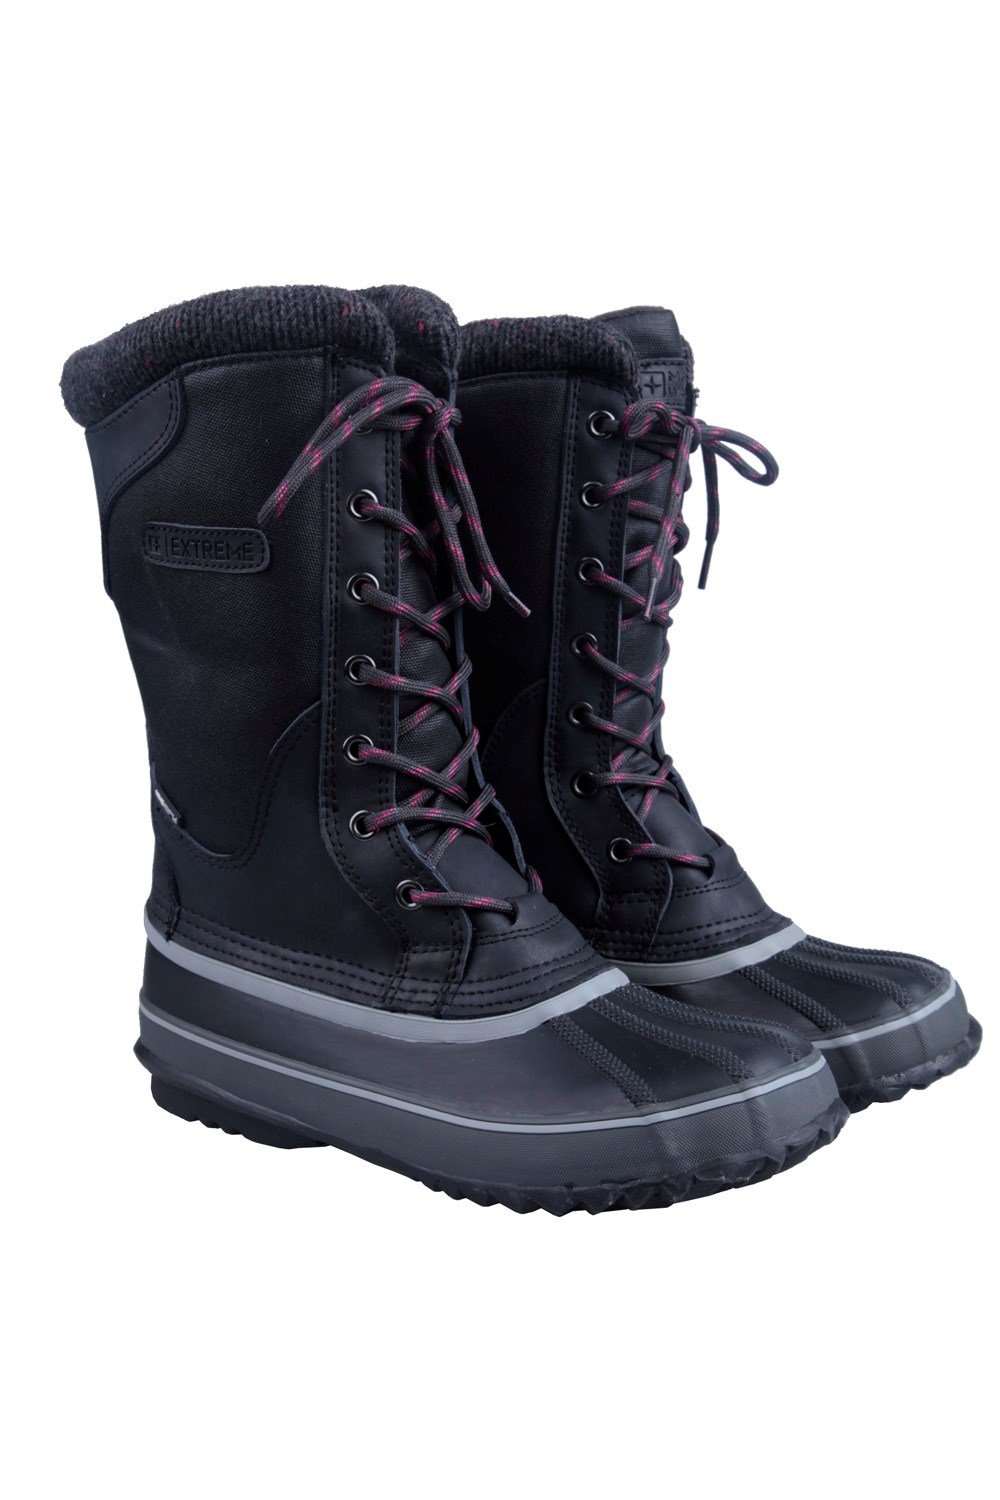 Womens Snow Boots | Winter Boots | Mountain Warehouse US